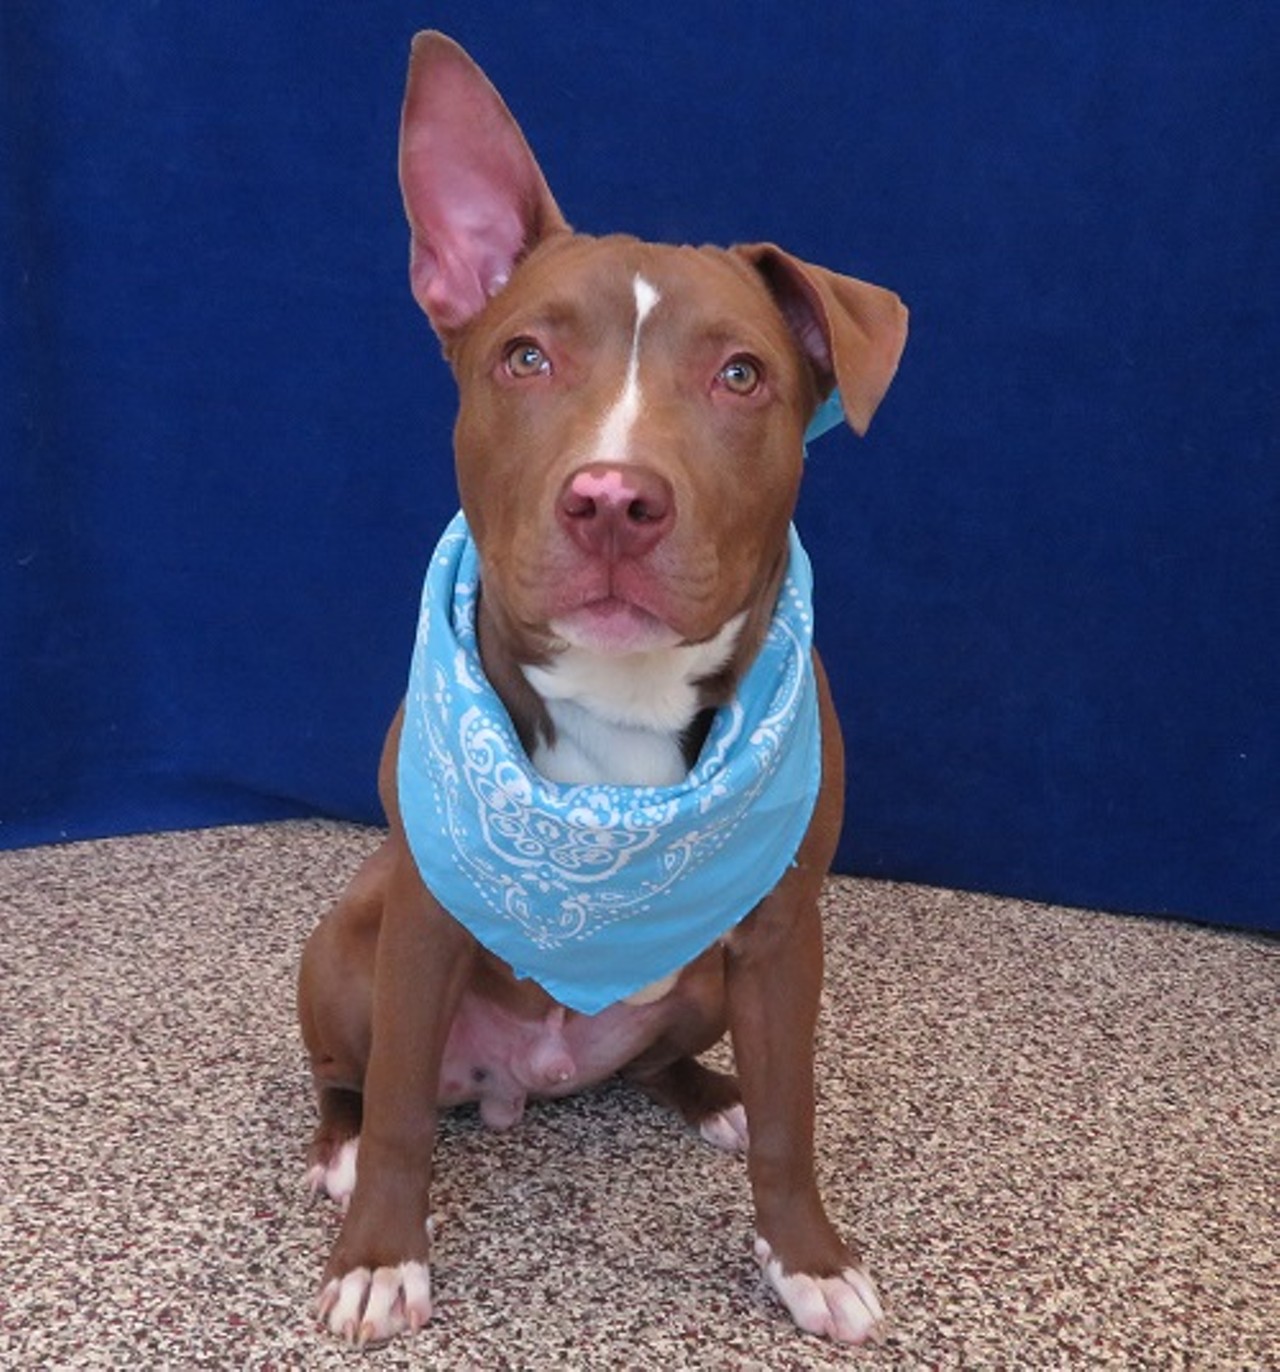 NAME: Red Wing
GENDER: Male
BREED: Pit Bull Terrier
AGE: 6 months
WEIGHT: 40 pounds
SPECIAL CONSIDERATIONS: None
REASON I CAME TO MHS: Owner surrender
LOCATION: Petco of Sterling Heights
ID NUMBER: 865323